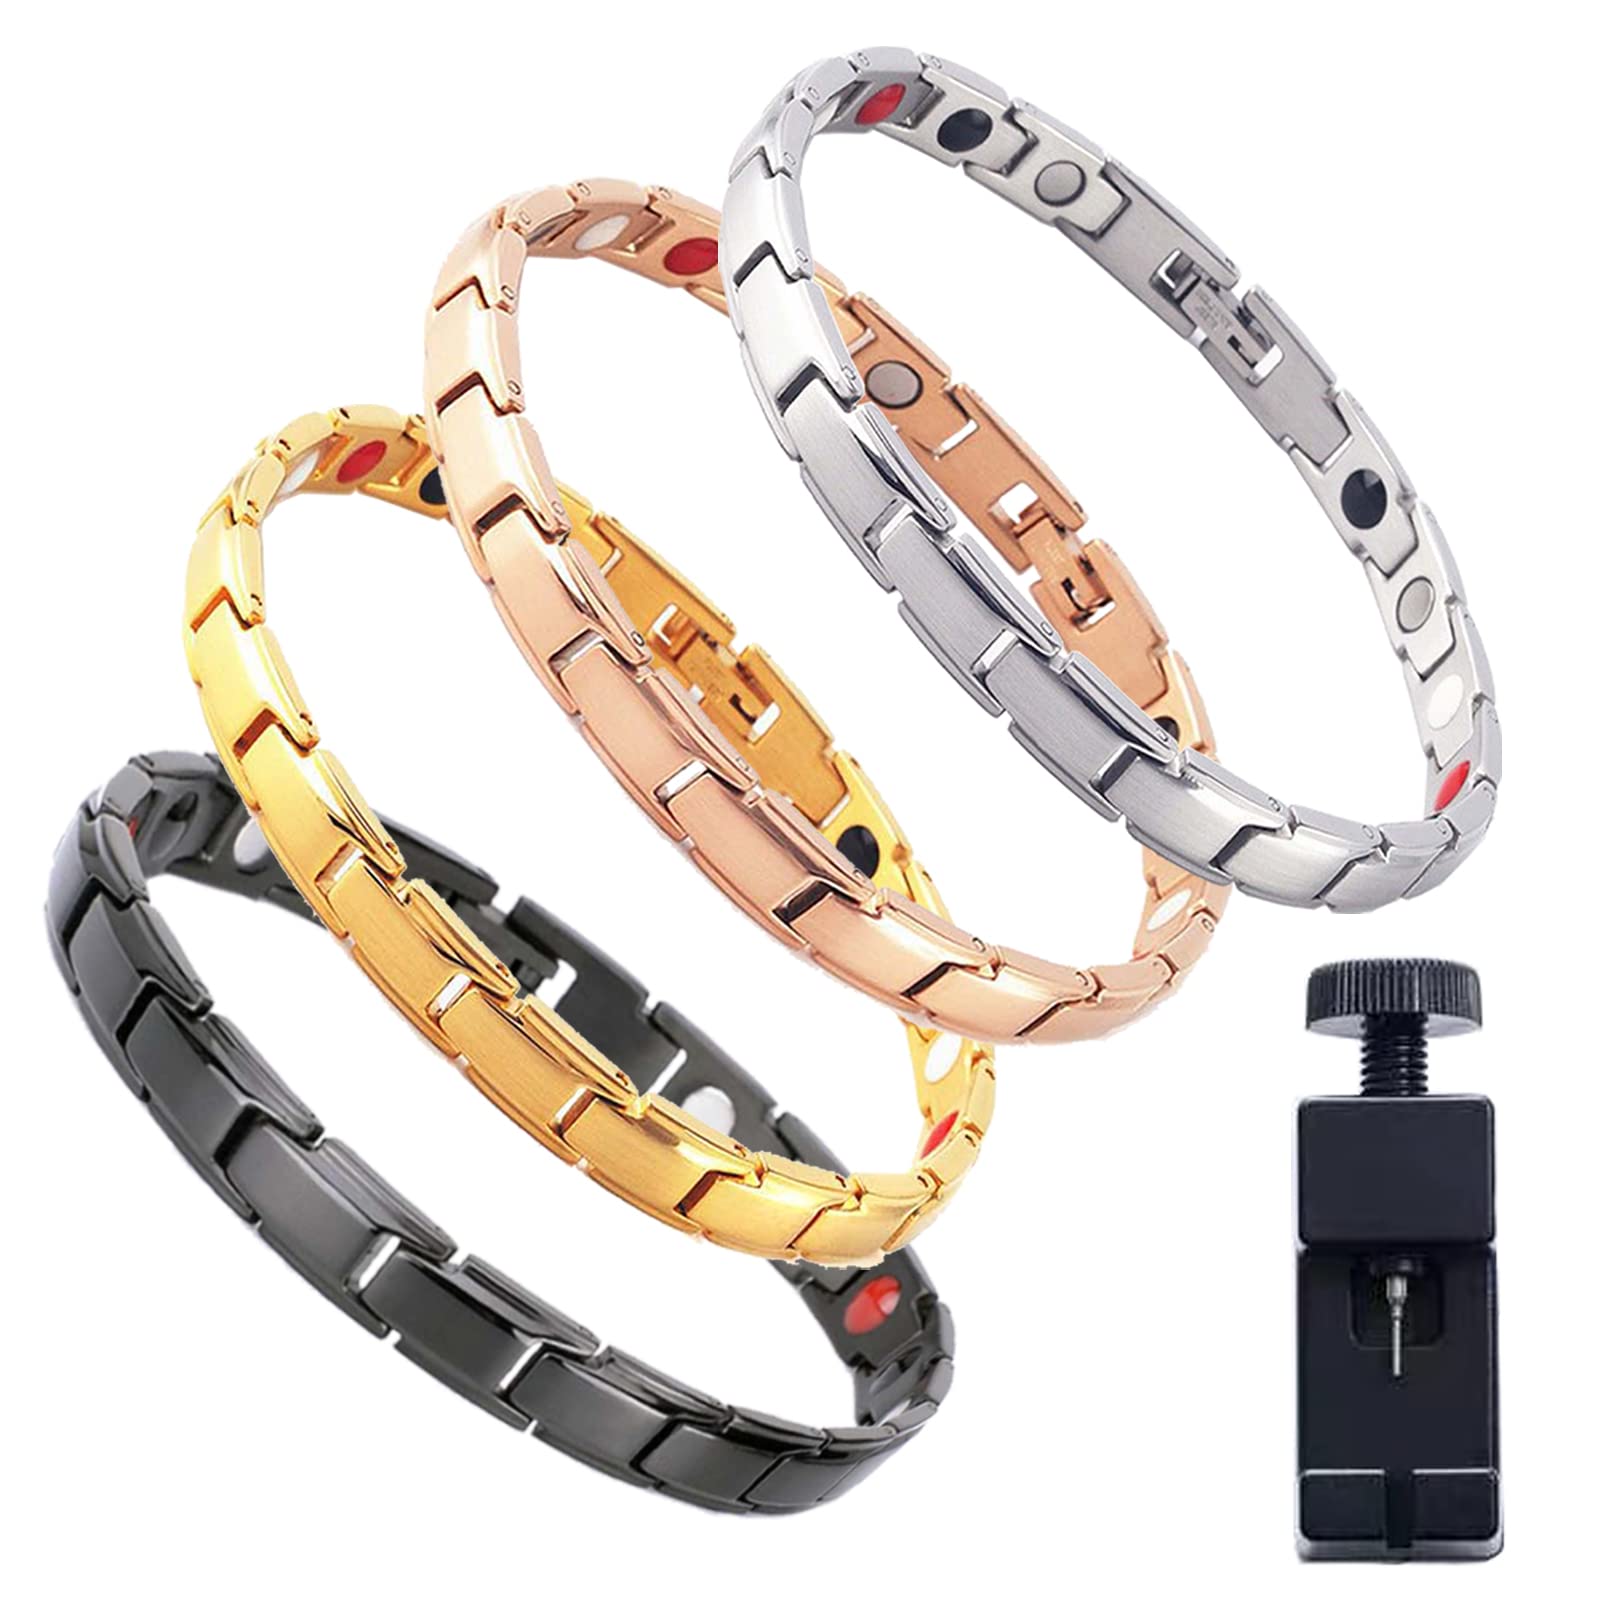 Therapy Arthritis Pain Relief Health Care Slimming Unisex Jewelry Men Women Therapeutic  Energy Healing Magnetic Bracelet Bangle - AliExpress